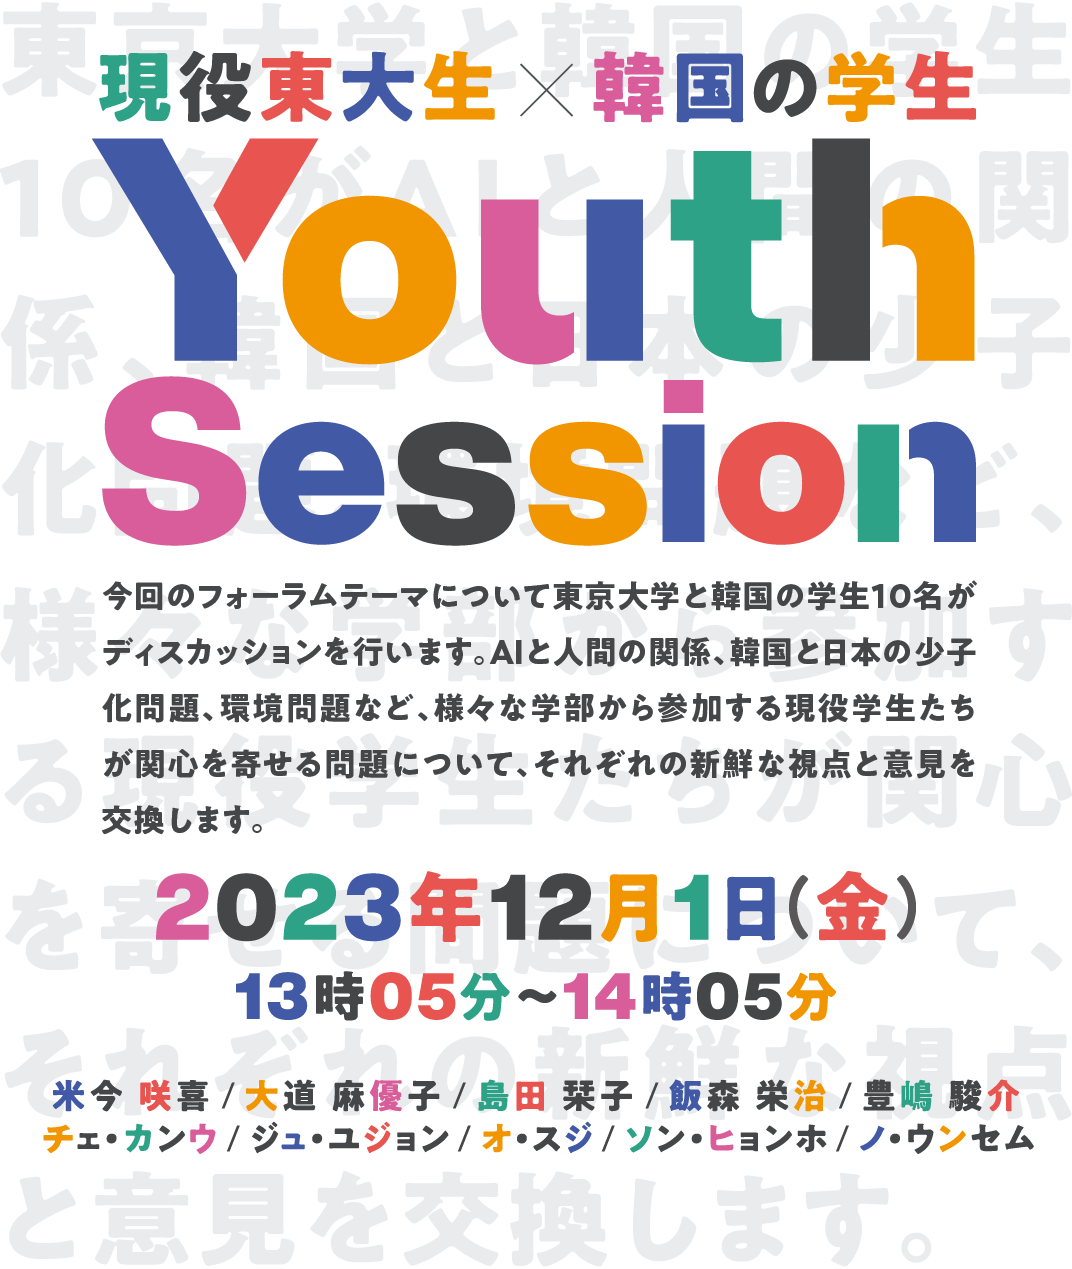 Youth Session